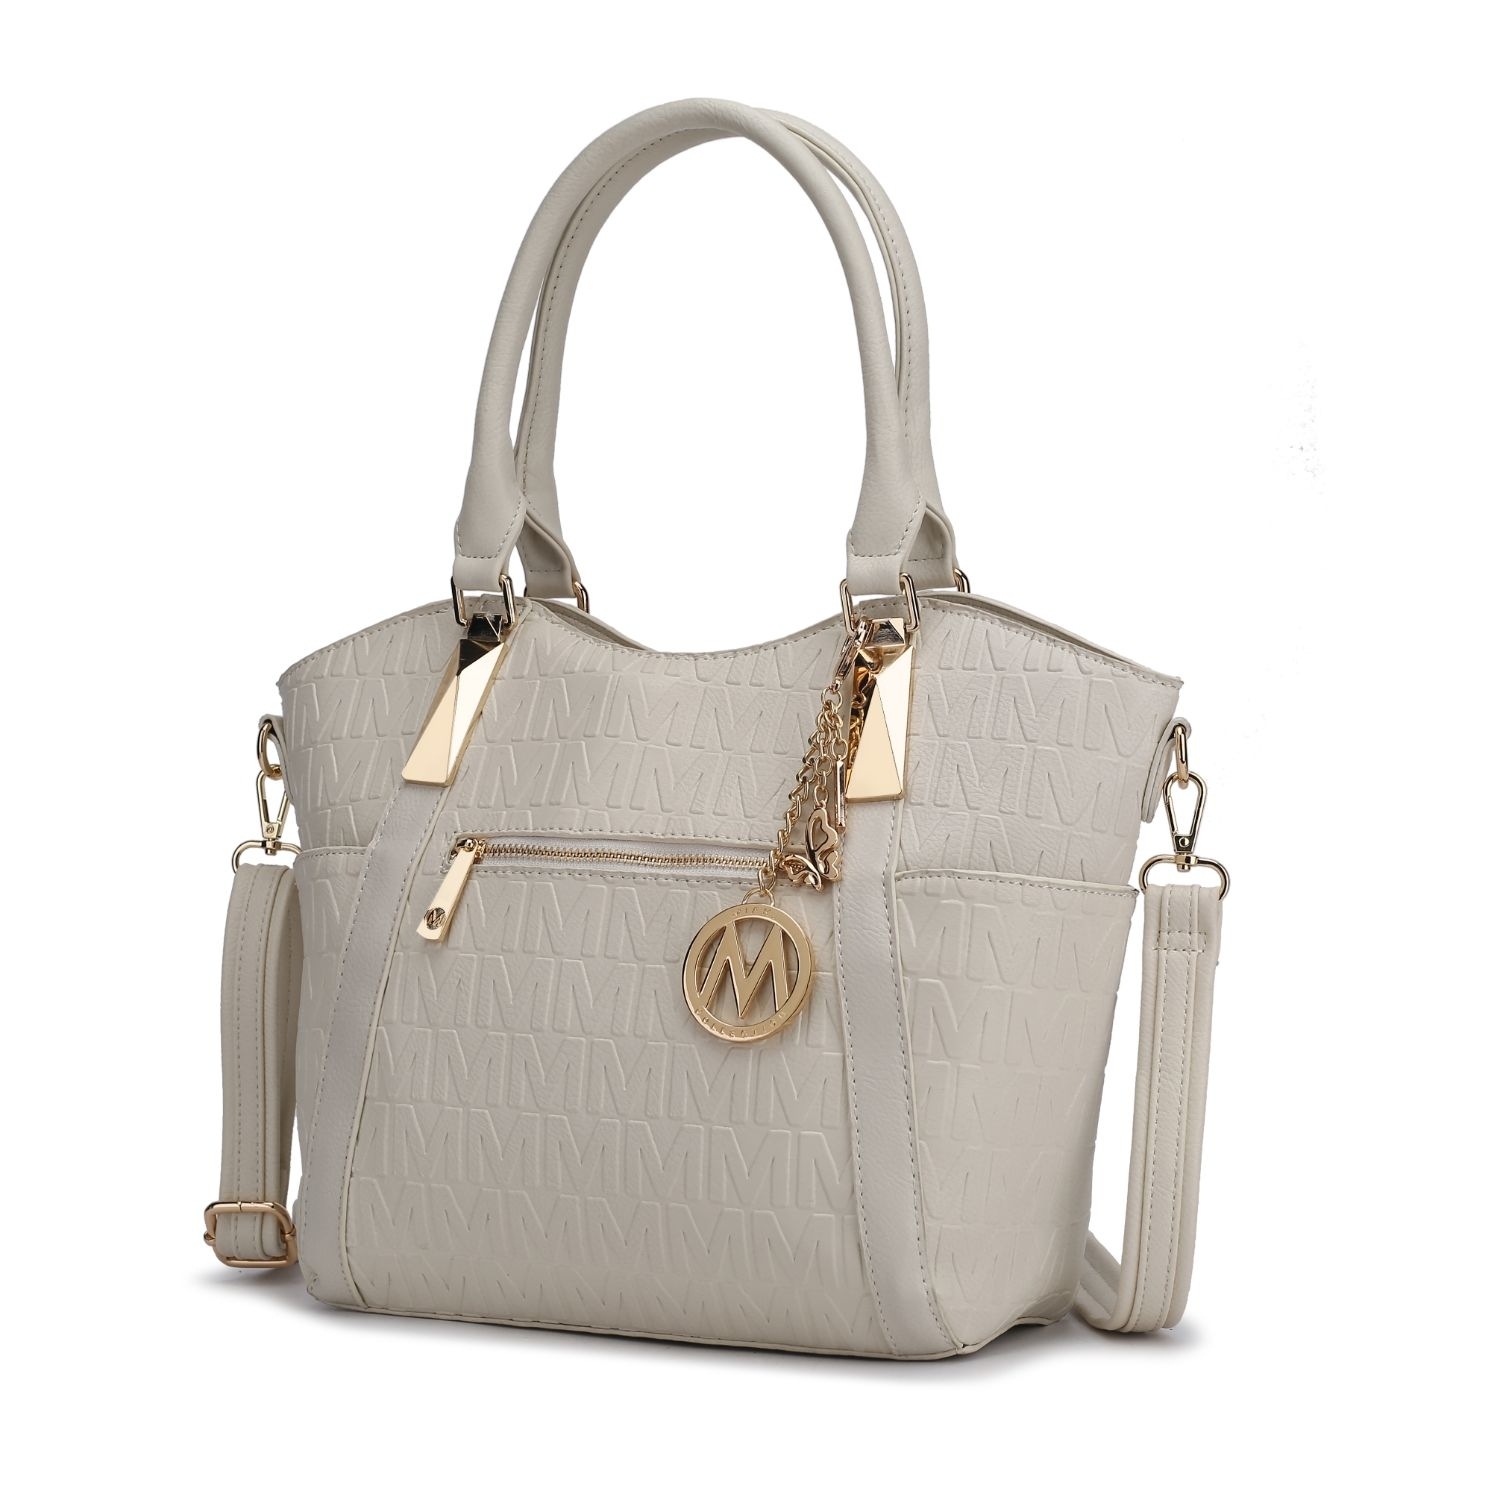 MKF Collection Lucy Tote Handbag By Mia K. - Taupe